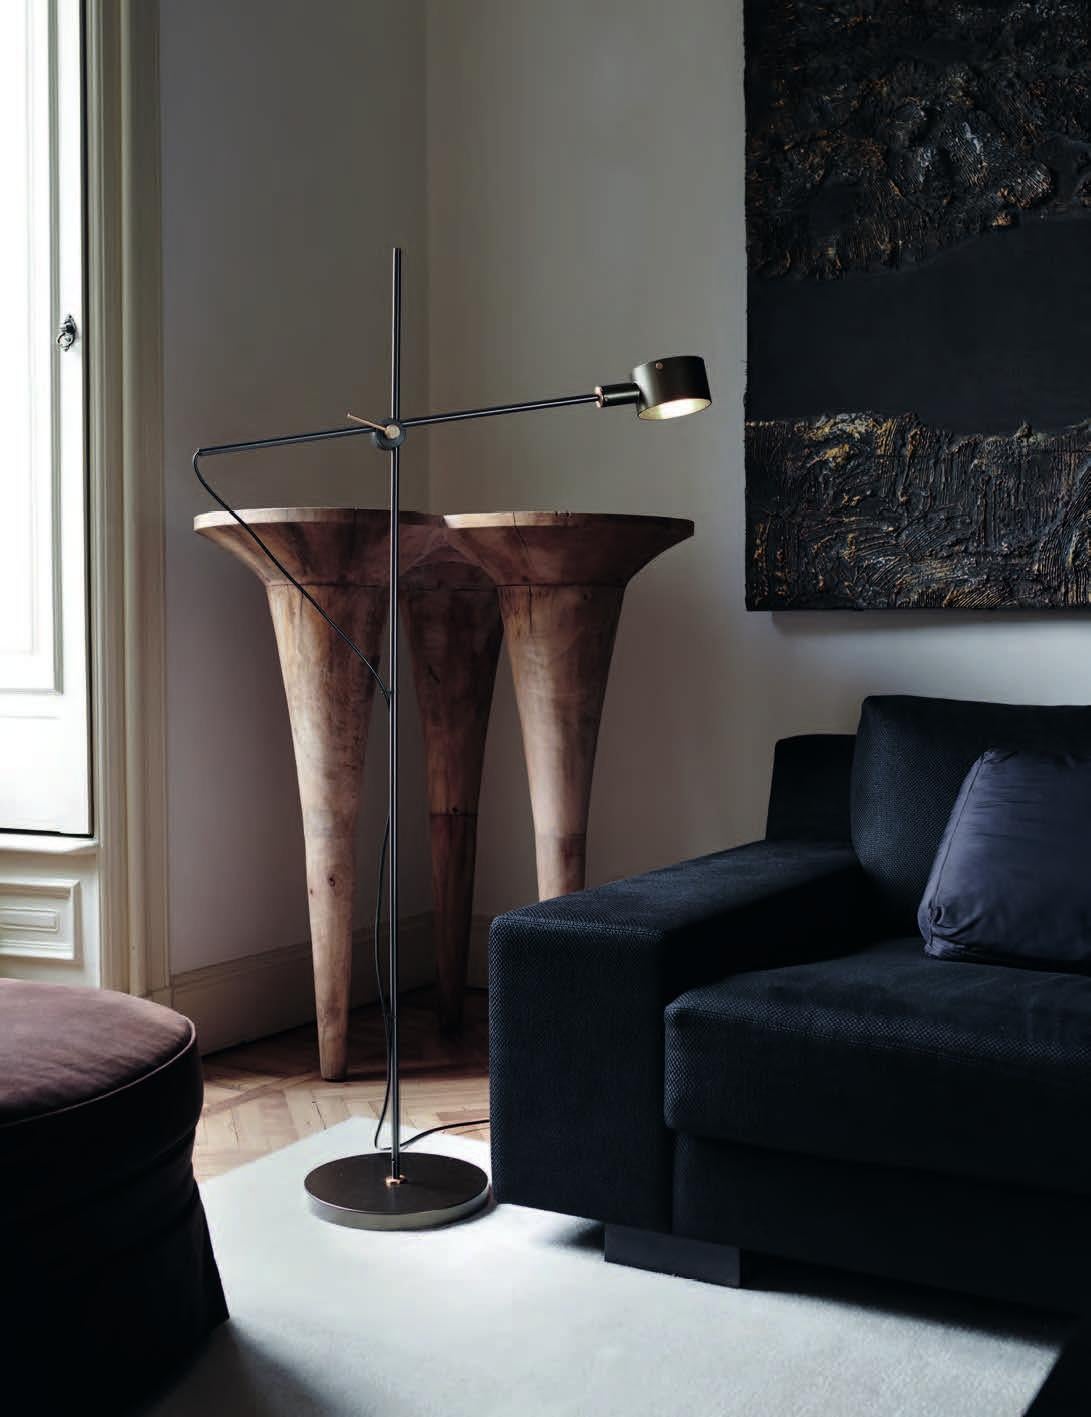 Giuseppe Ostuni Model 352 'G.O.' floor lamp in black for Oluce. 

Originally designed by Giuseppe Ostuni in the 1960s, this iconic re-edition is still crafted by Oluce in Italy using many of the original manufacturing techniques with scrupulous